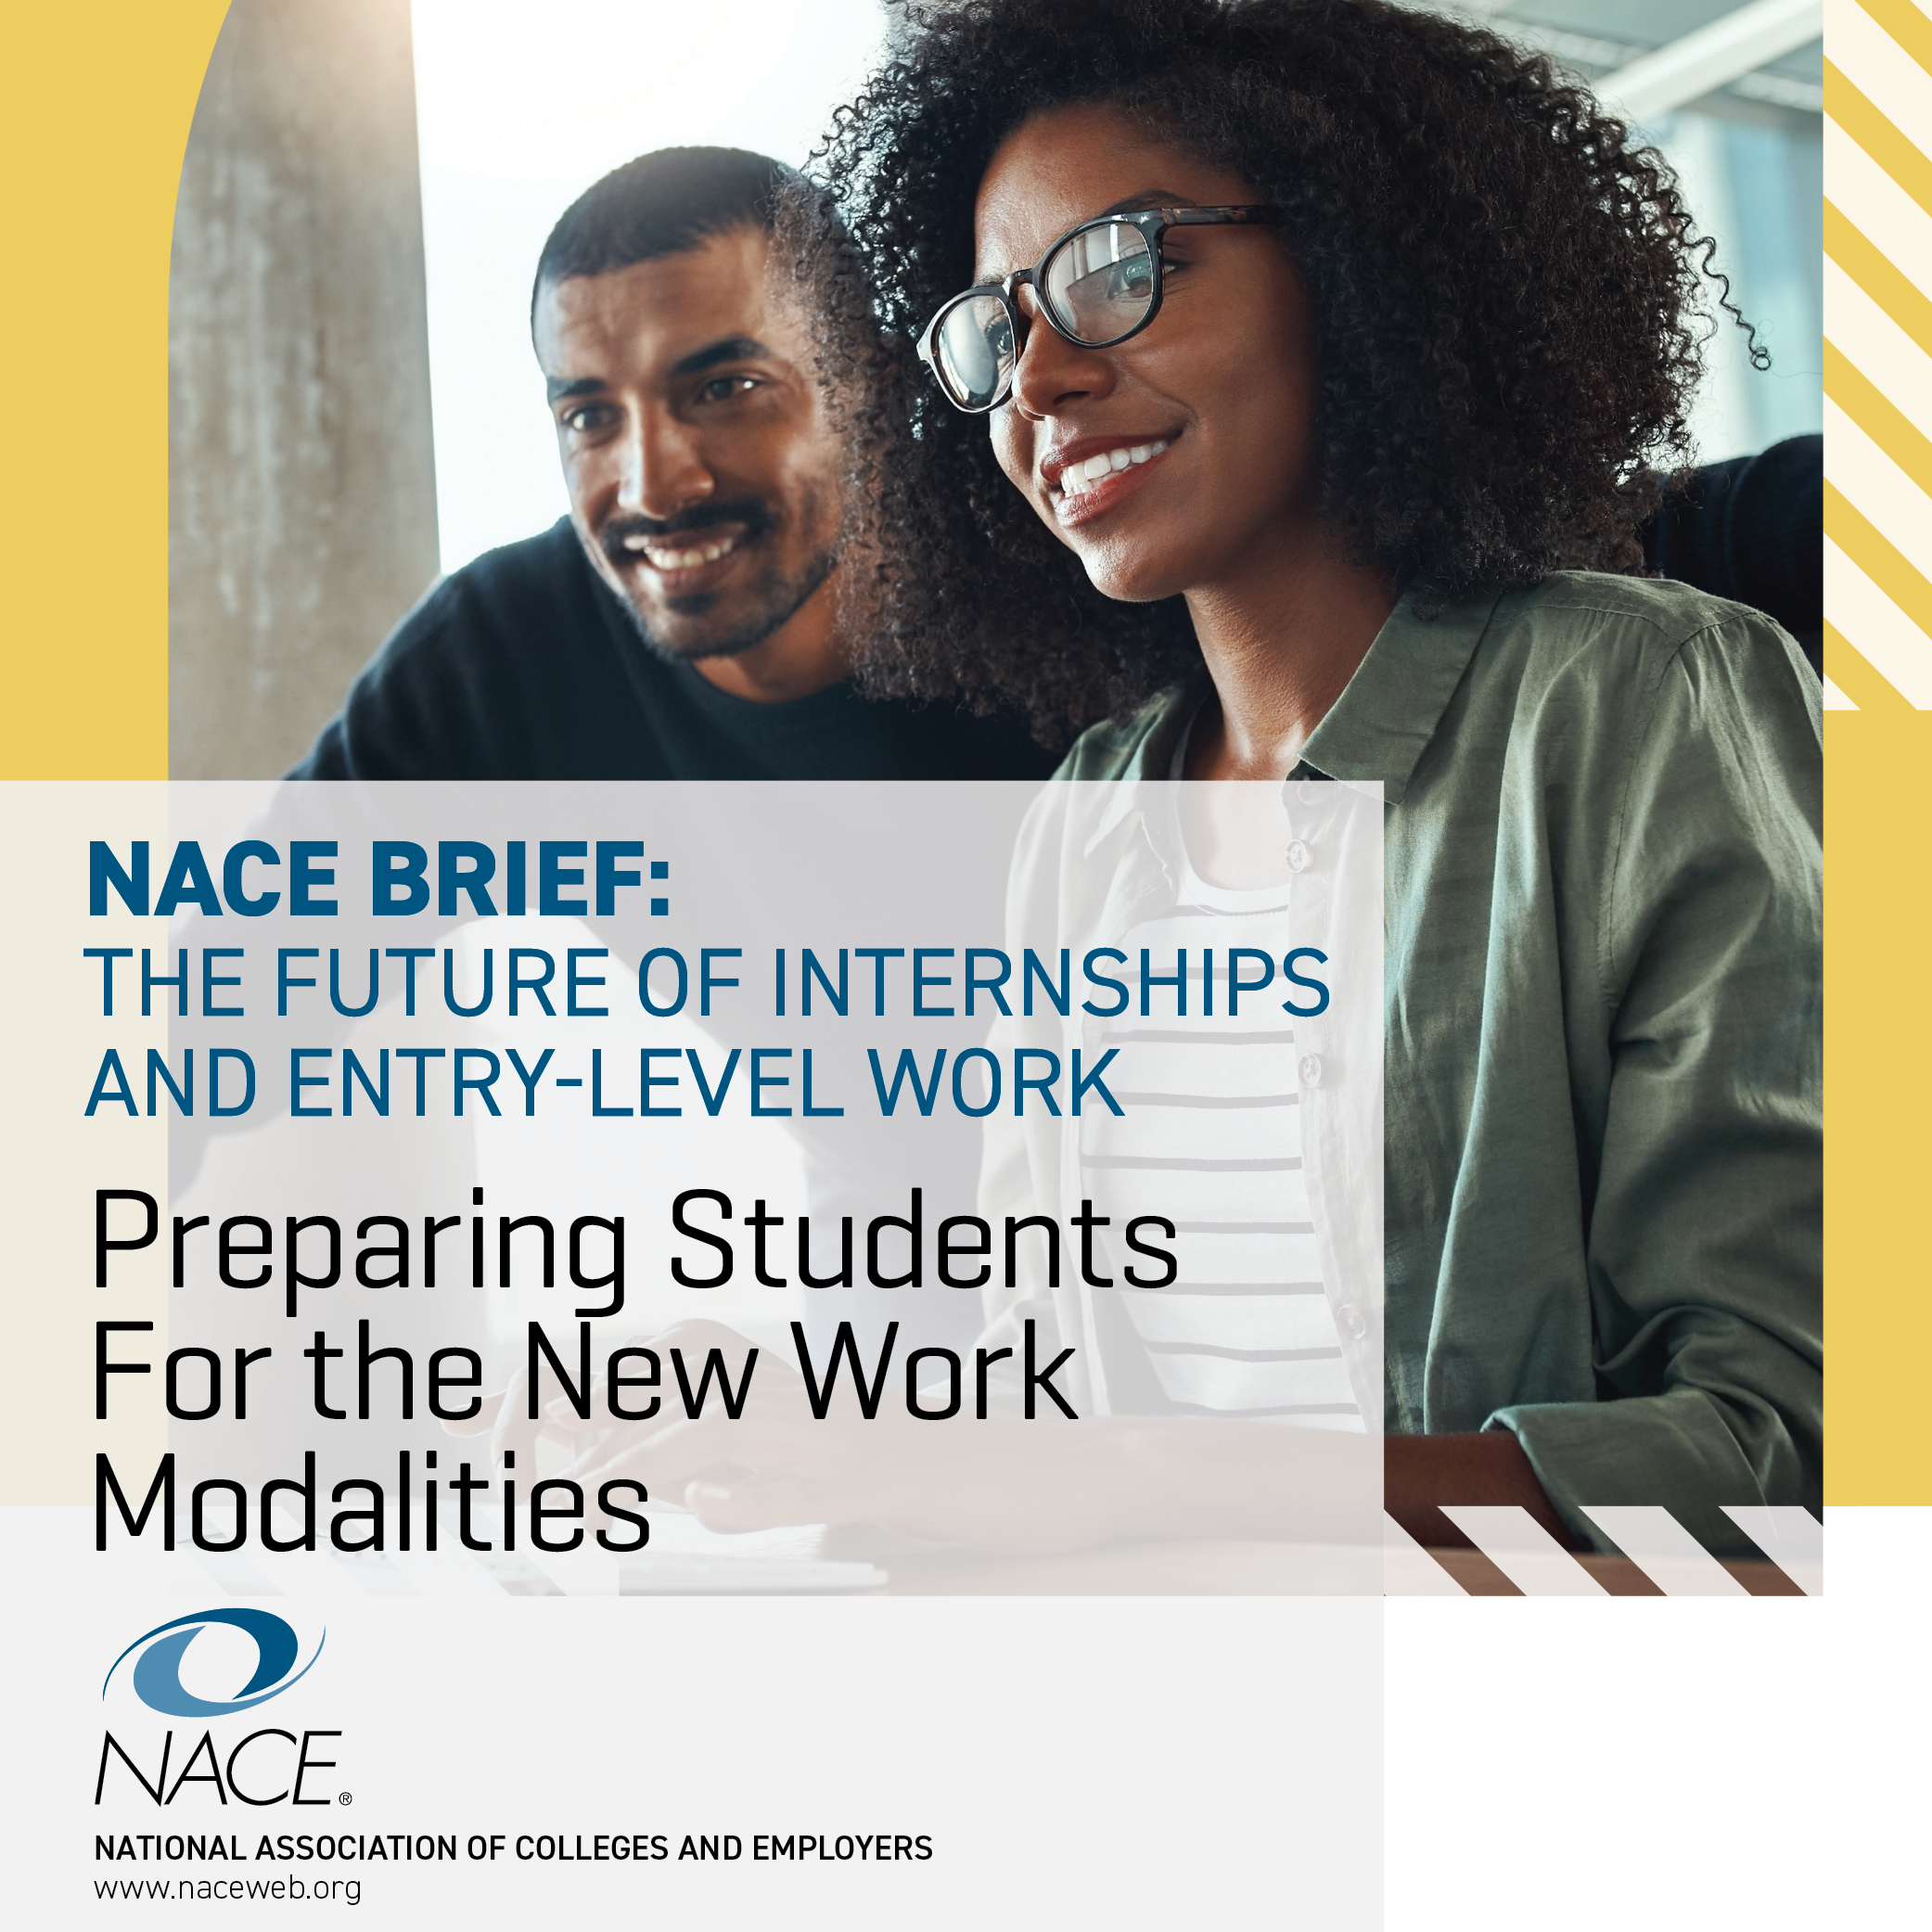 NACE BRIEF: The Future of Internships and Entry-Level Work